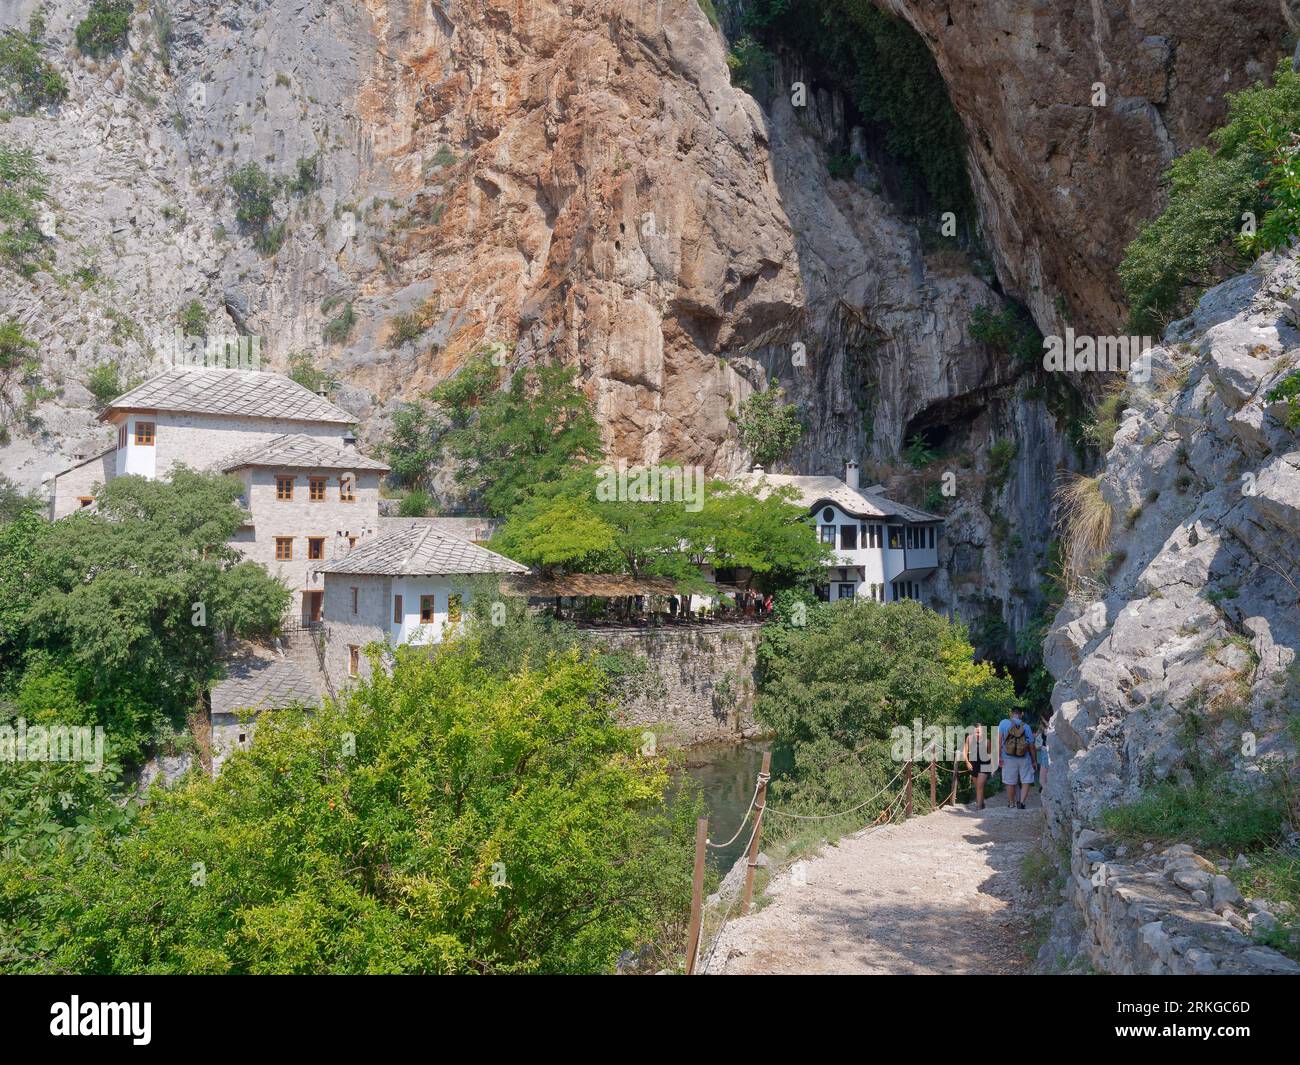 The Blagaj Monastery (or Blagaj Tekija) on the Buna River with tourists on a path in foreground near Mostar, Bosnia and Herzegovina, August 24, 2023. Stock Photo